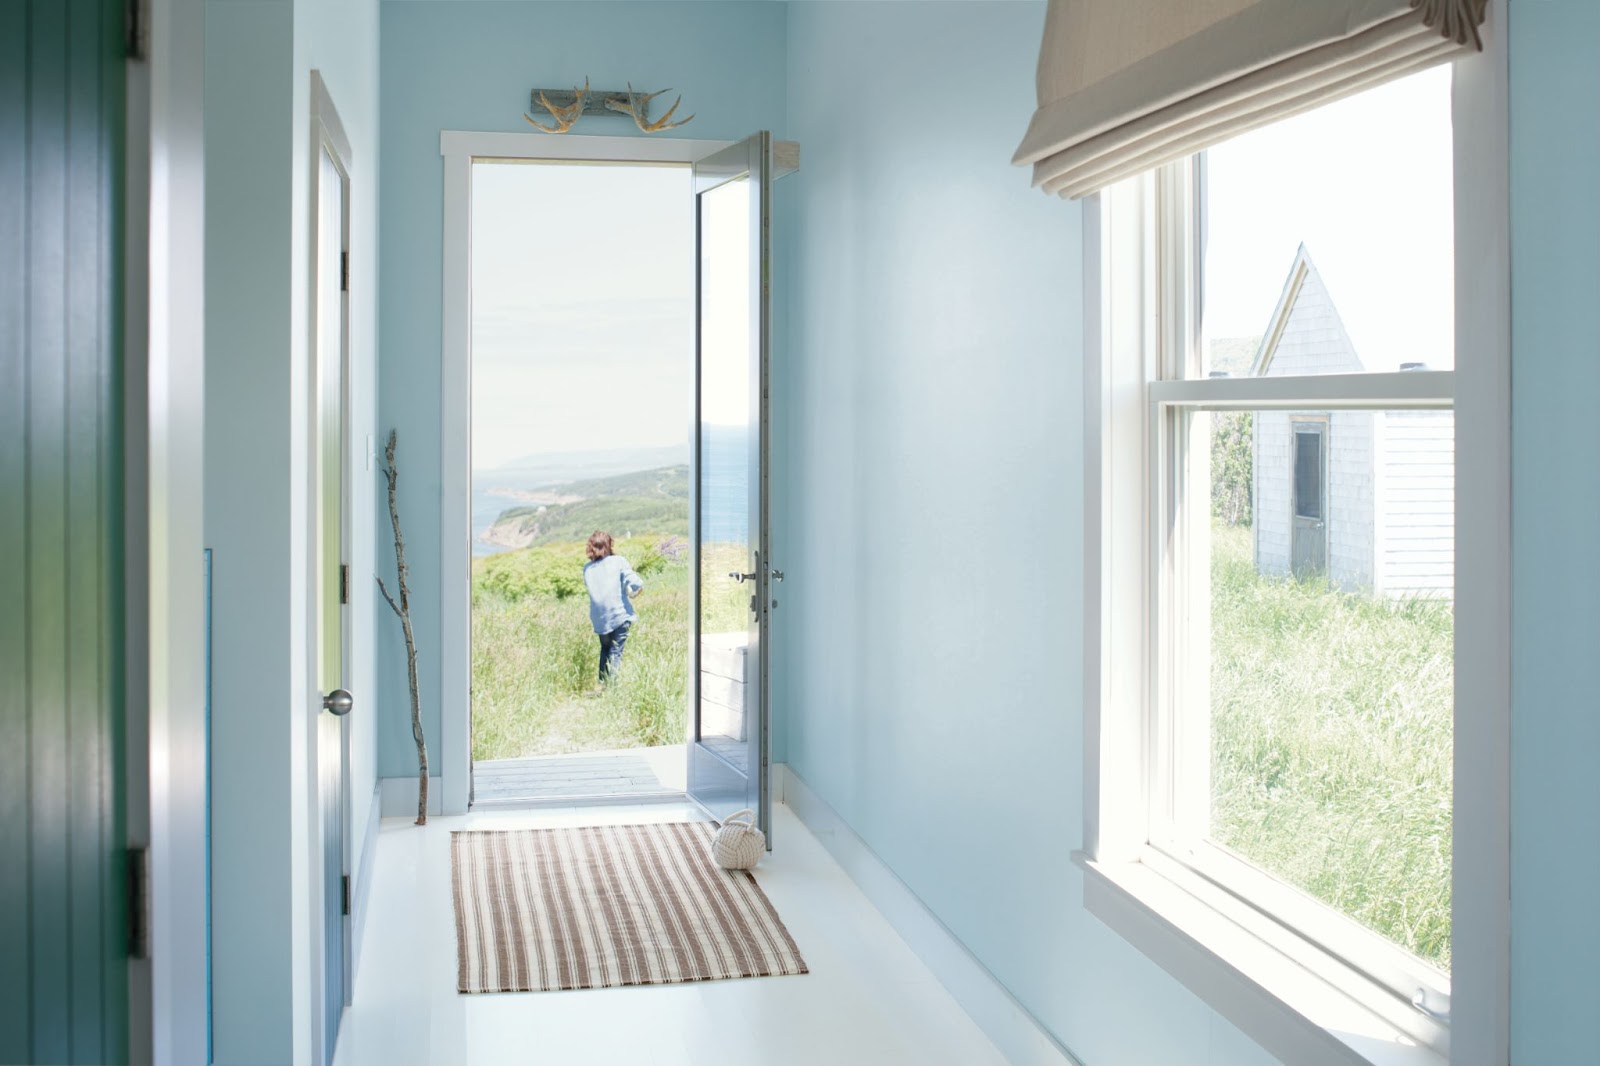 Benjamin Moore Breath of Fresh Air wall color is paired with trim in Benjamin Moore White Dove OC-17